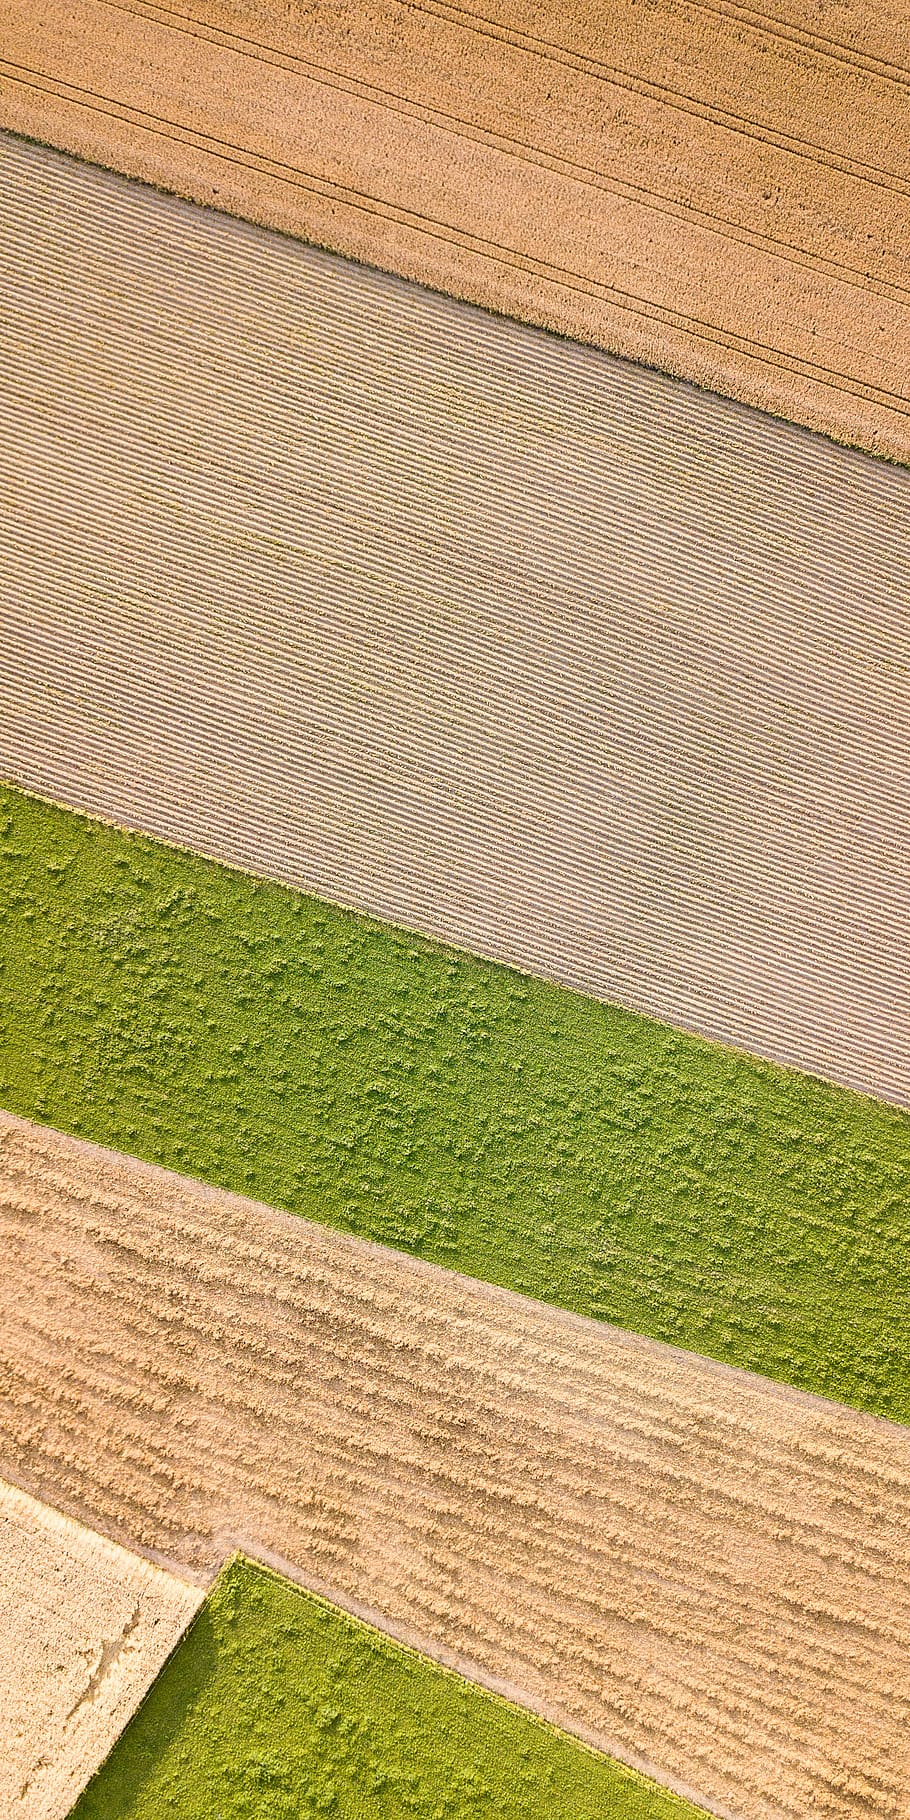 field, agriculture, from above, summer, nature, green color, full frame, backgrounds, pattern, grass